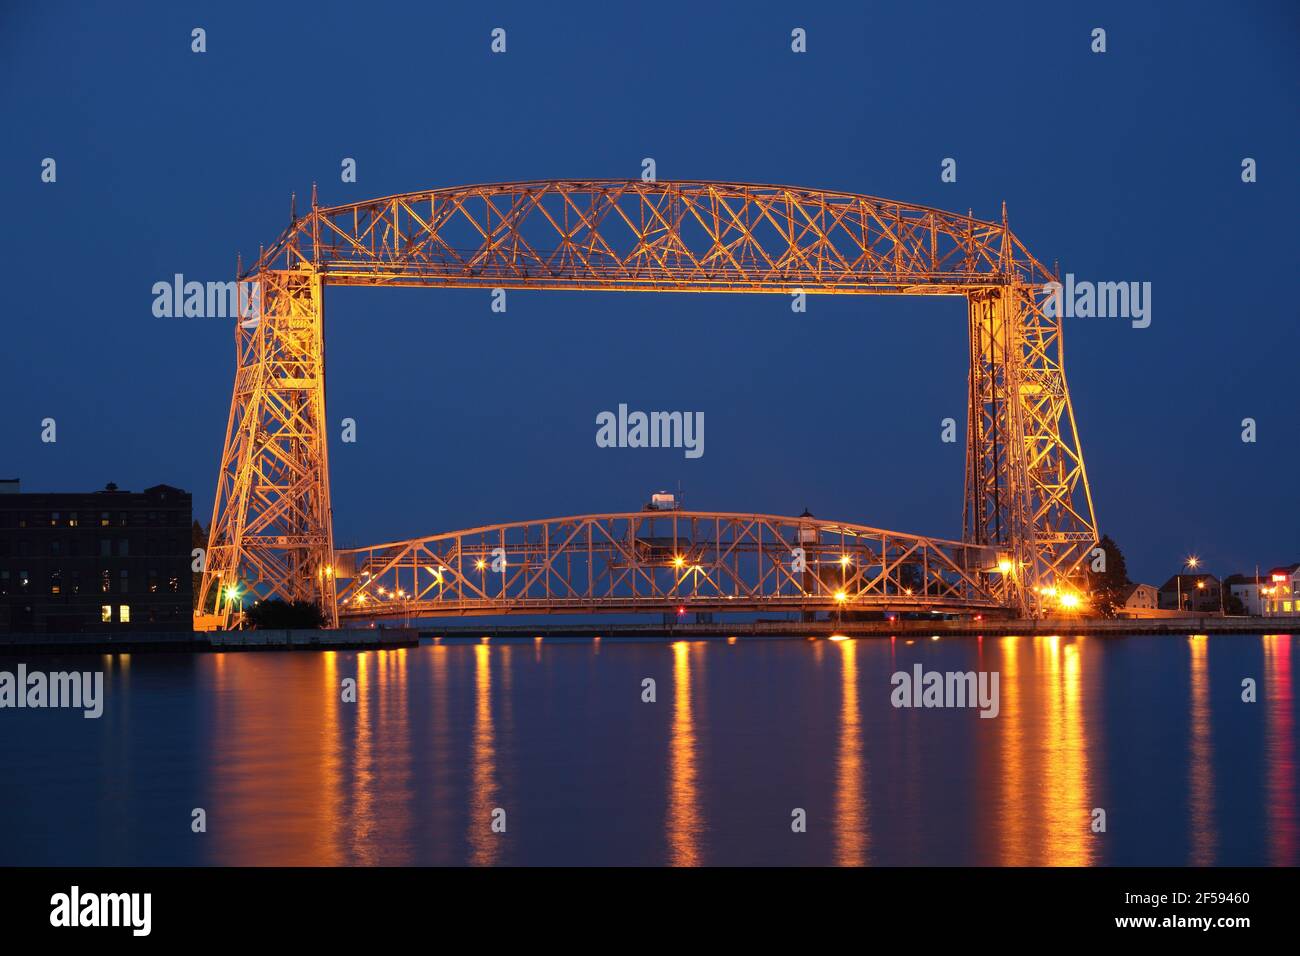 Geographie / Reisen, USA, Minnesota, Duluth, Luftbrücke bei Nacht, Lake Superior, Additional-Rights-Clearance-Info-not-available Stockfoto